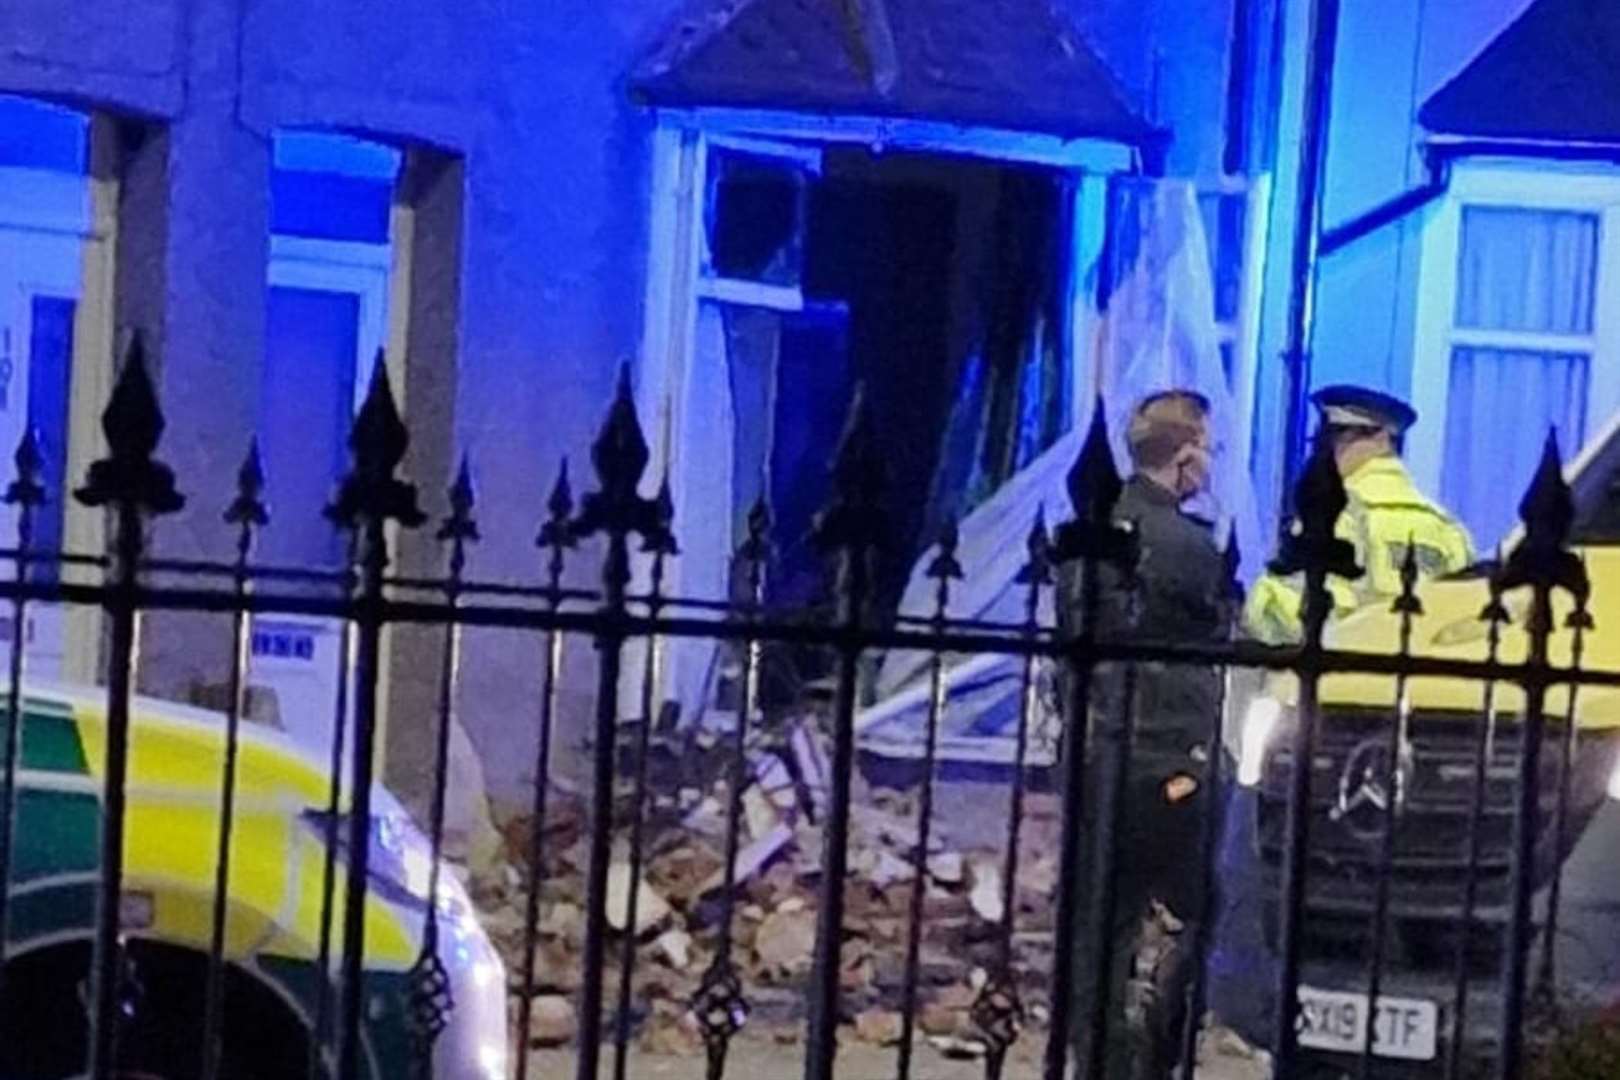 A car smashed into a house in Boundary Road, Ramsgate